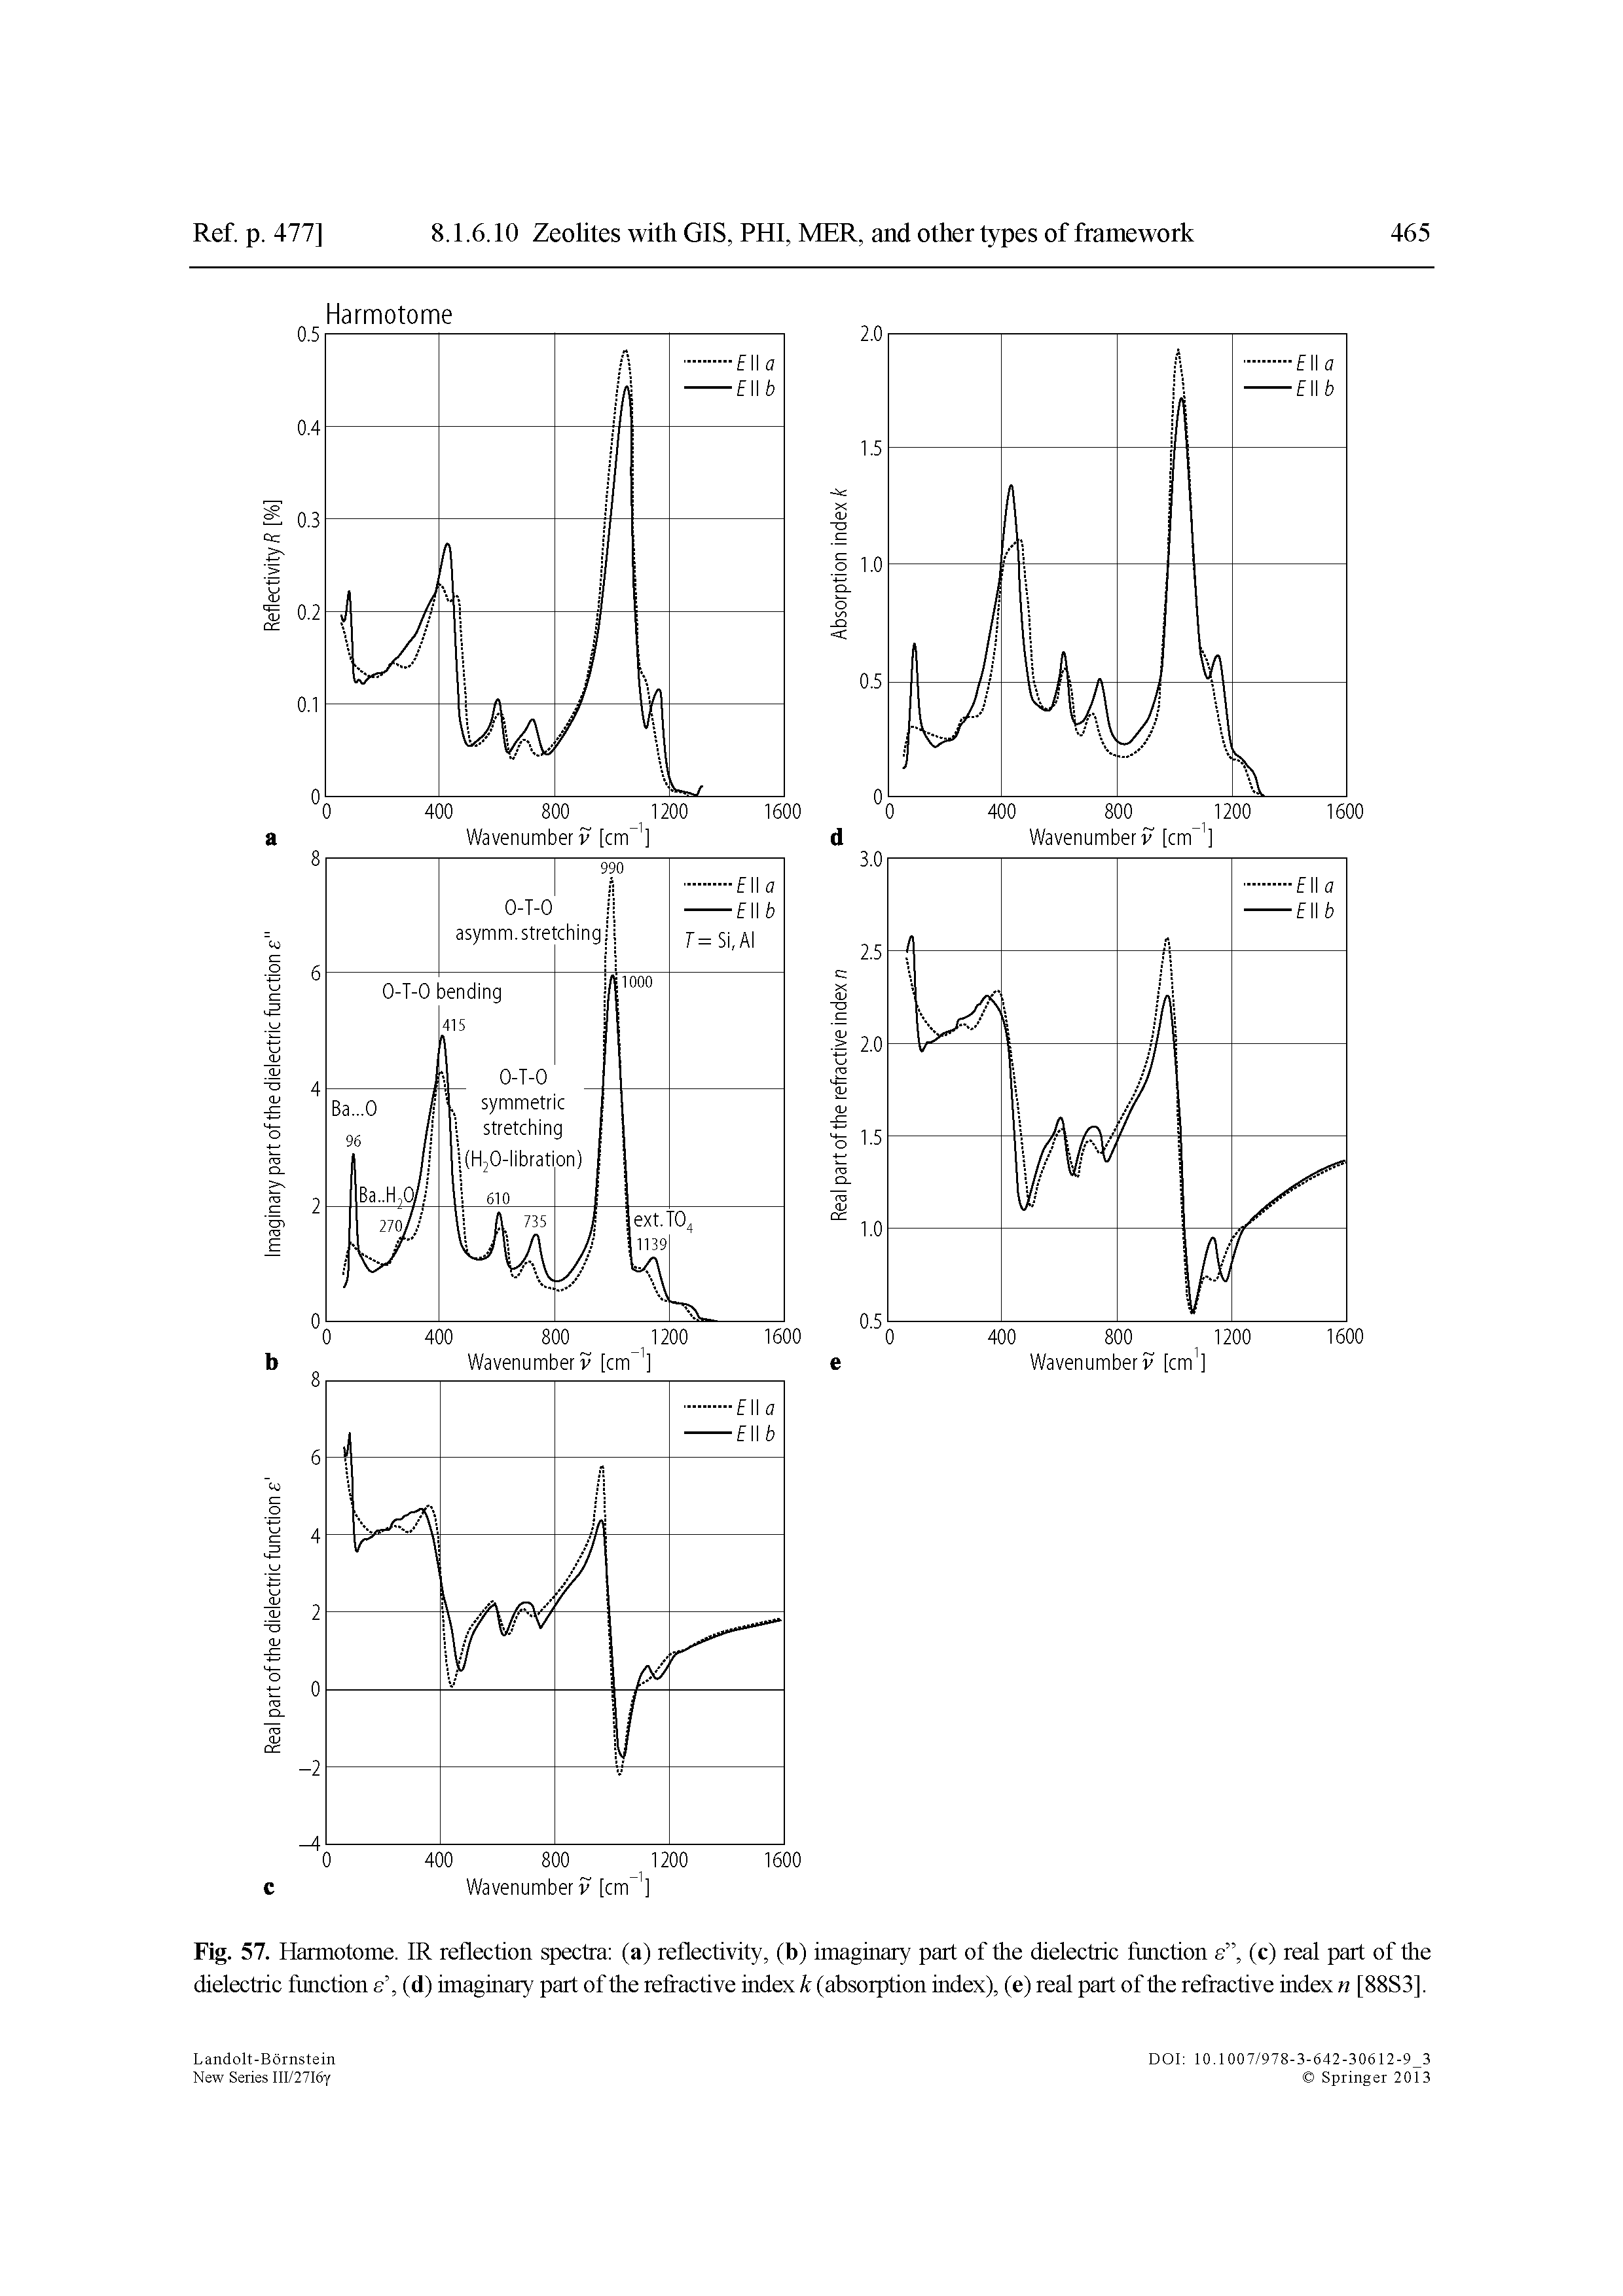 Fig. 57. Harmotome. IR reflection spectra (a) reflectivity, (b) imaginary part of the dielectric function e , (c) real part of the dielectric function e , (d) imaginary part of the refractive index k (absorption index), (e) real part of the refractive index n [88S3],...